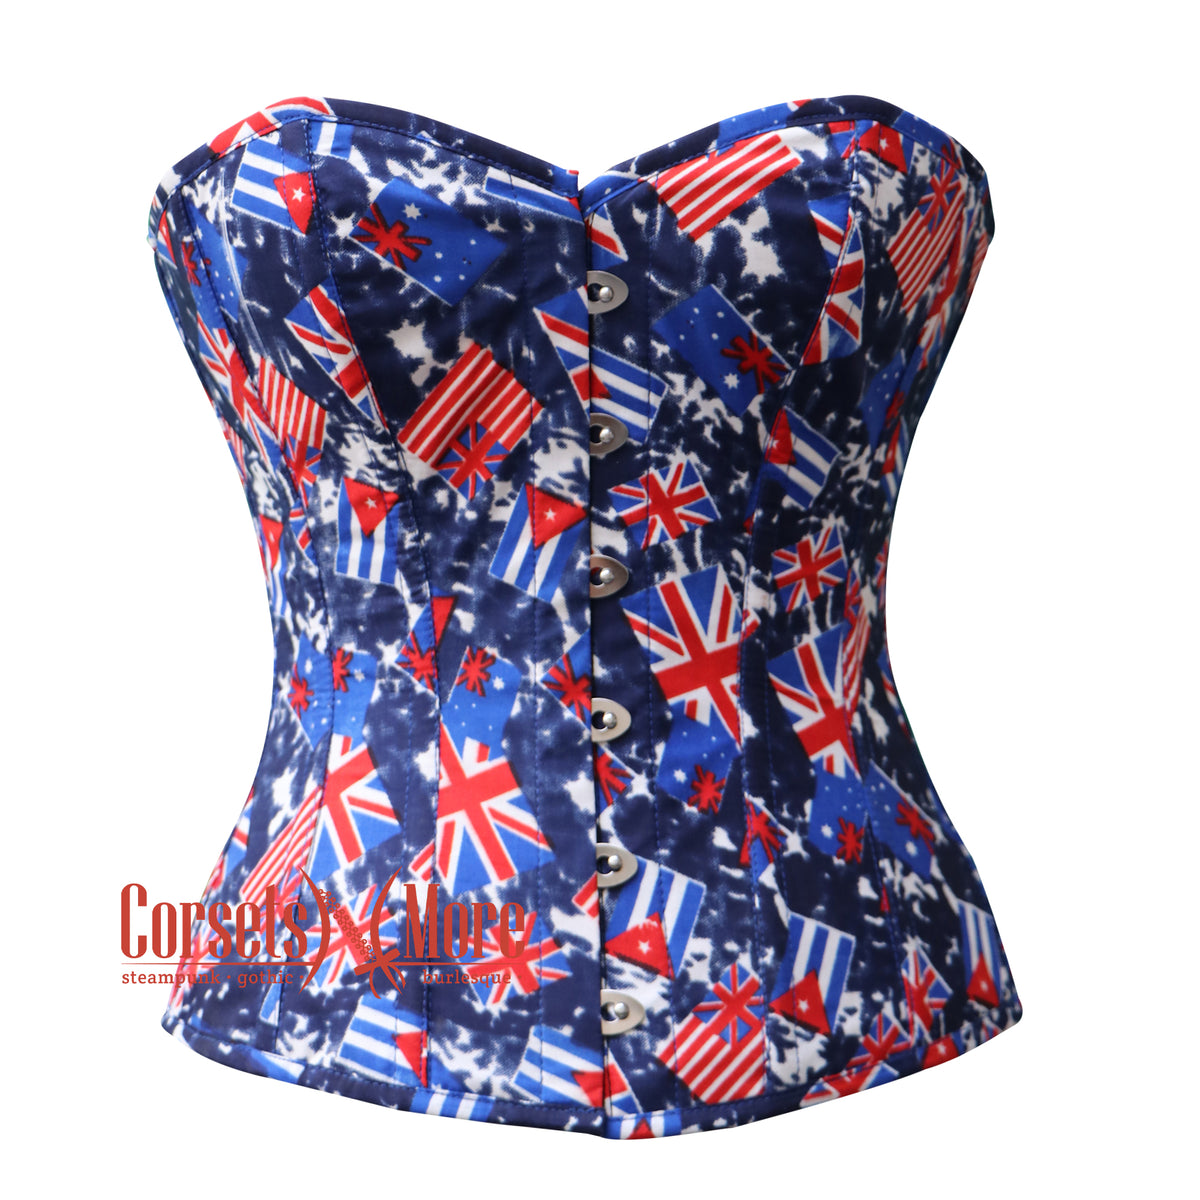 Uk Flag Printed Cotton Gothic Overbust Corset

– CorsetsNmore